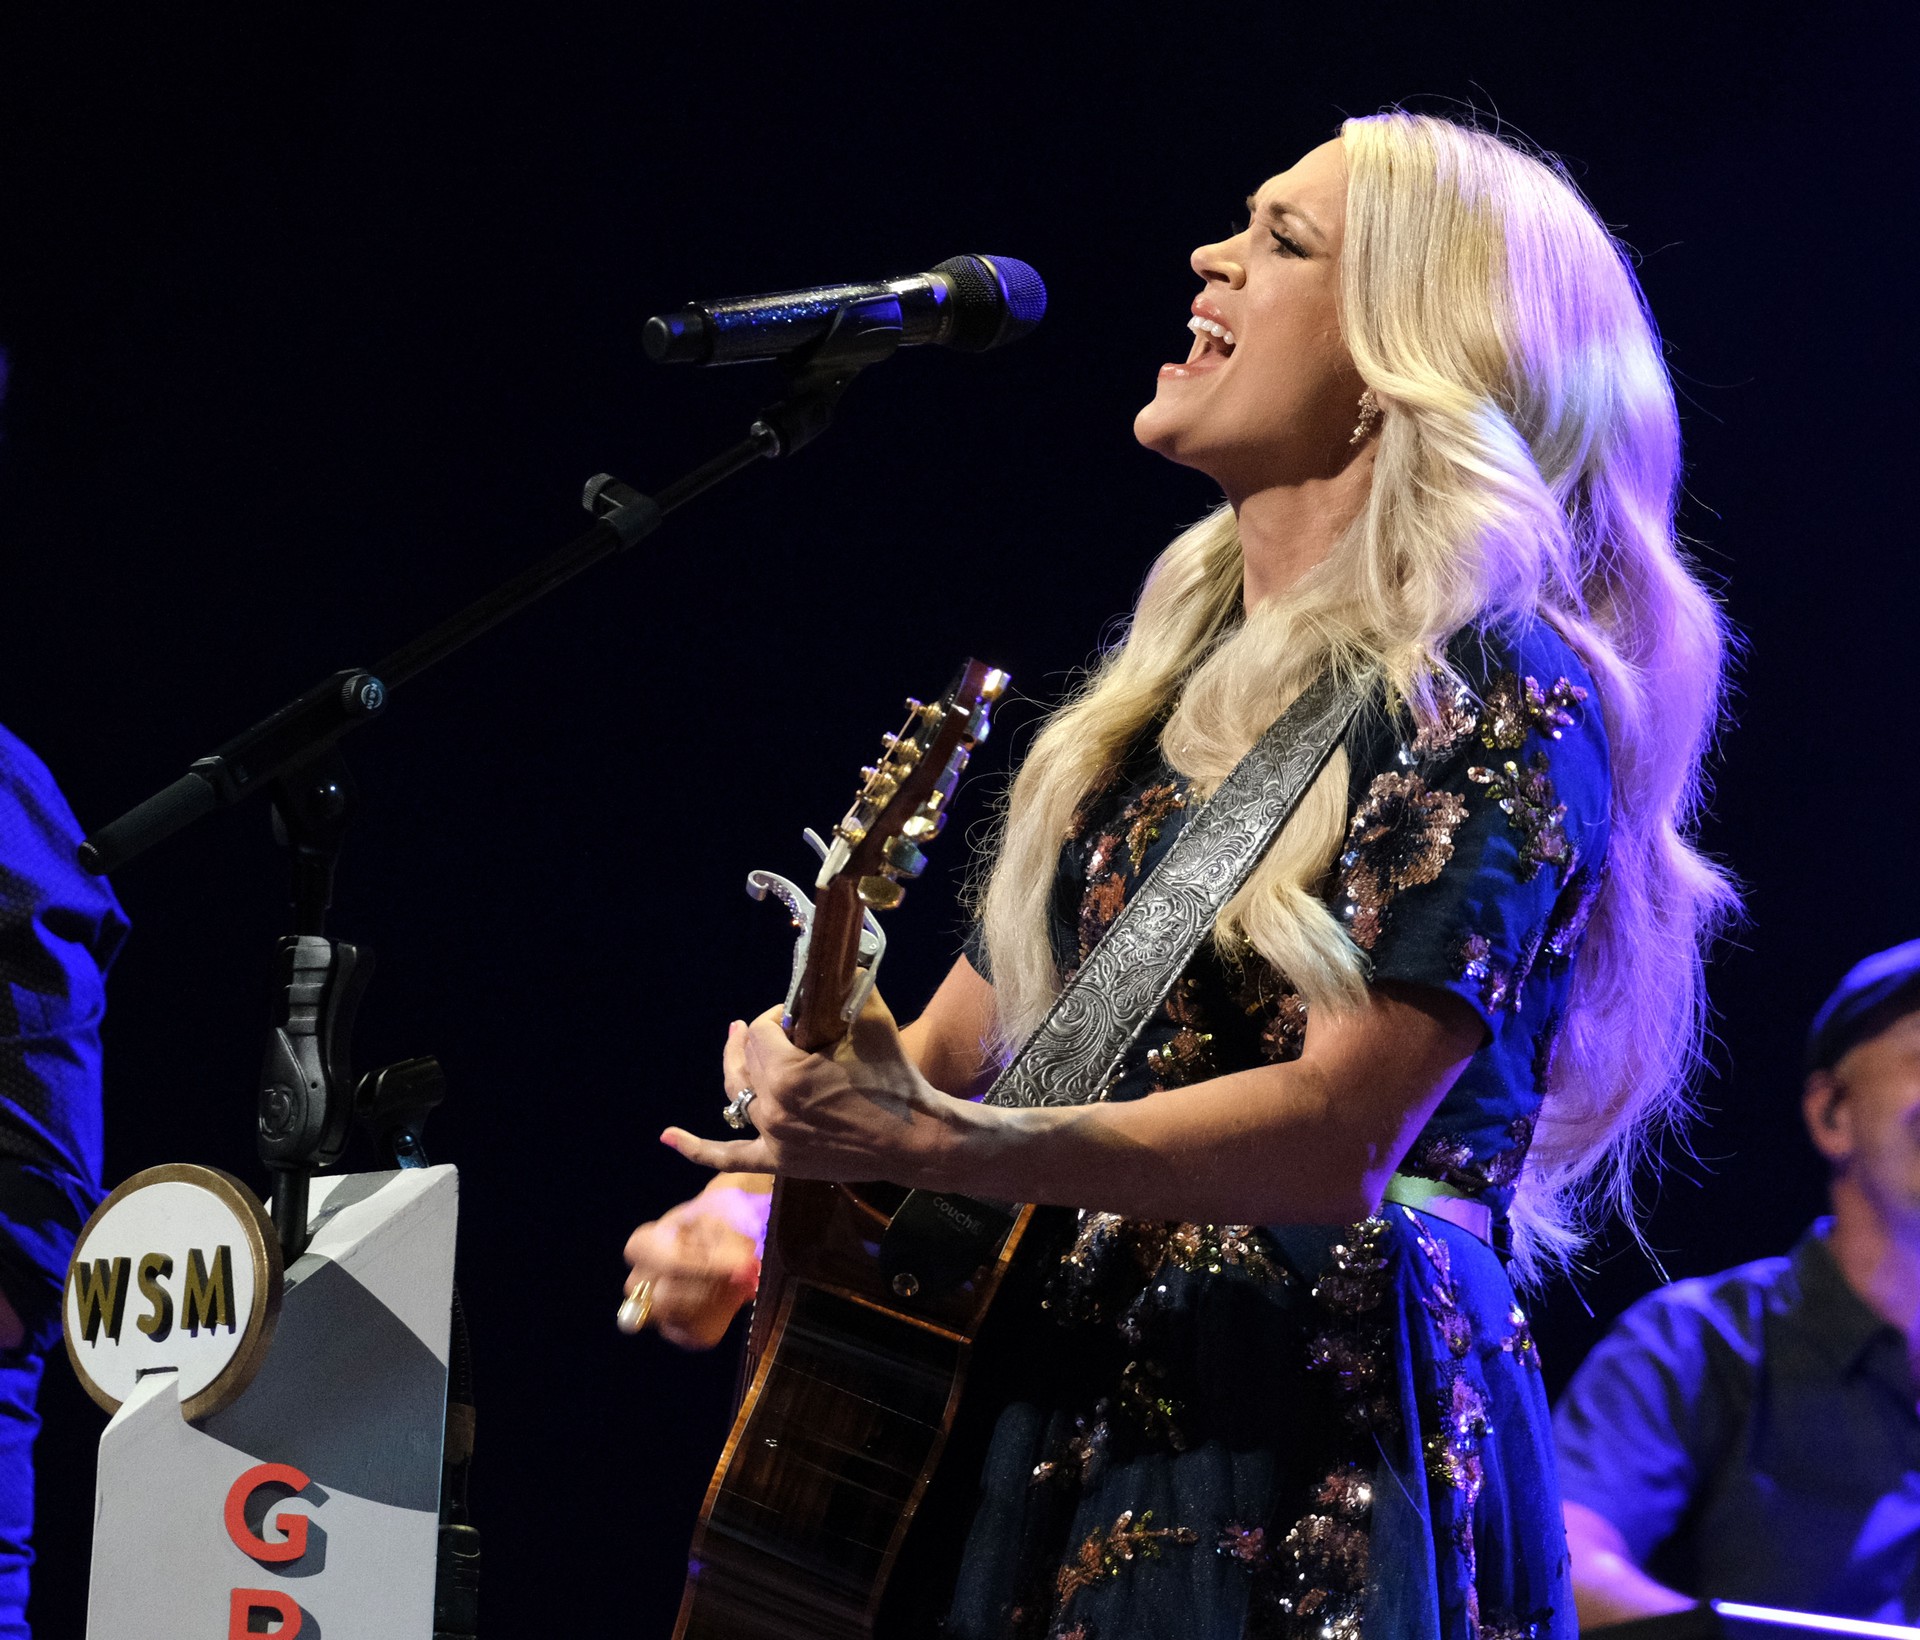 Carrie Underwood performs at the Grand Ole Opry in Nashville 2019/07/19